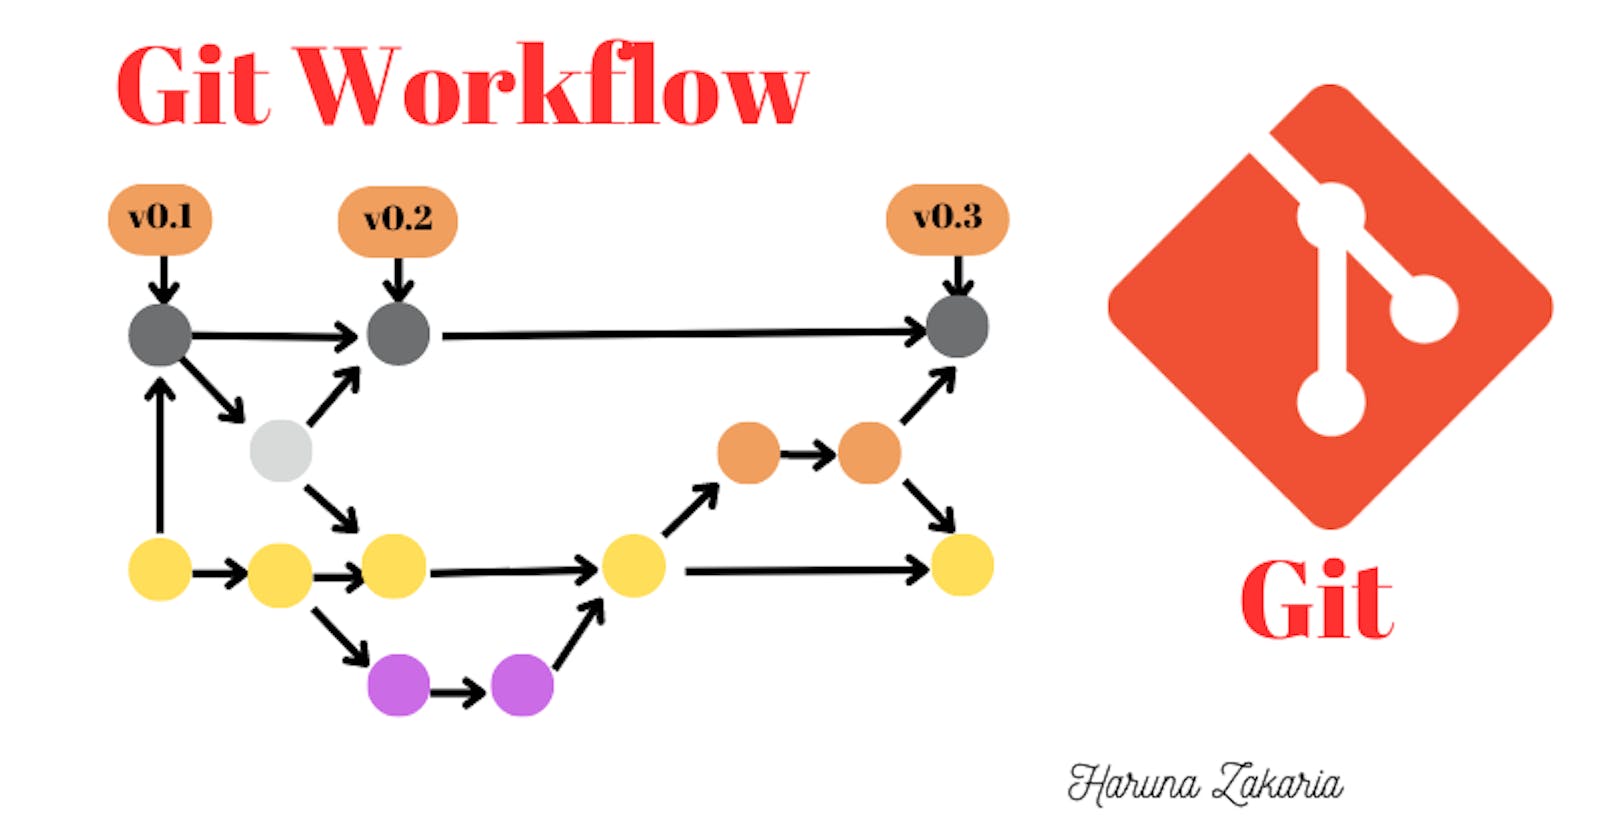 Introduction to Git Workflows